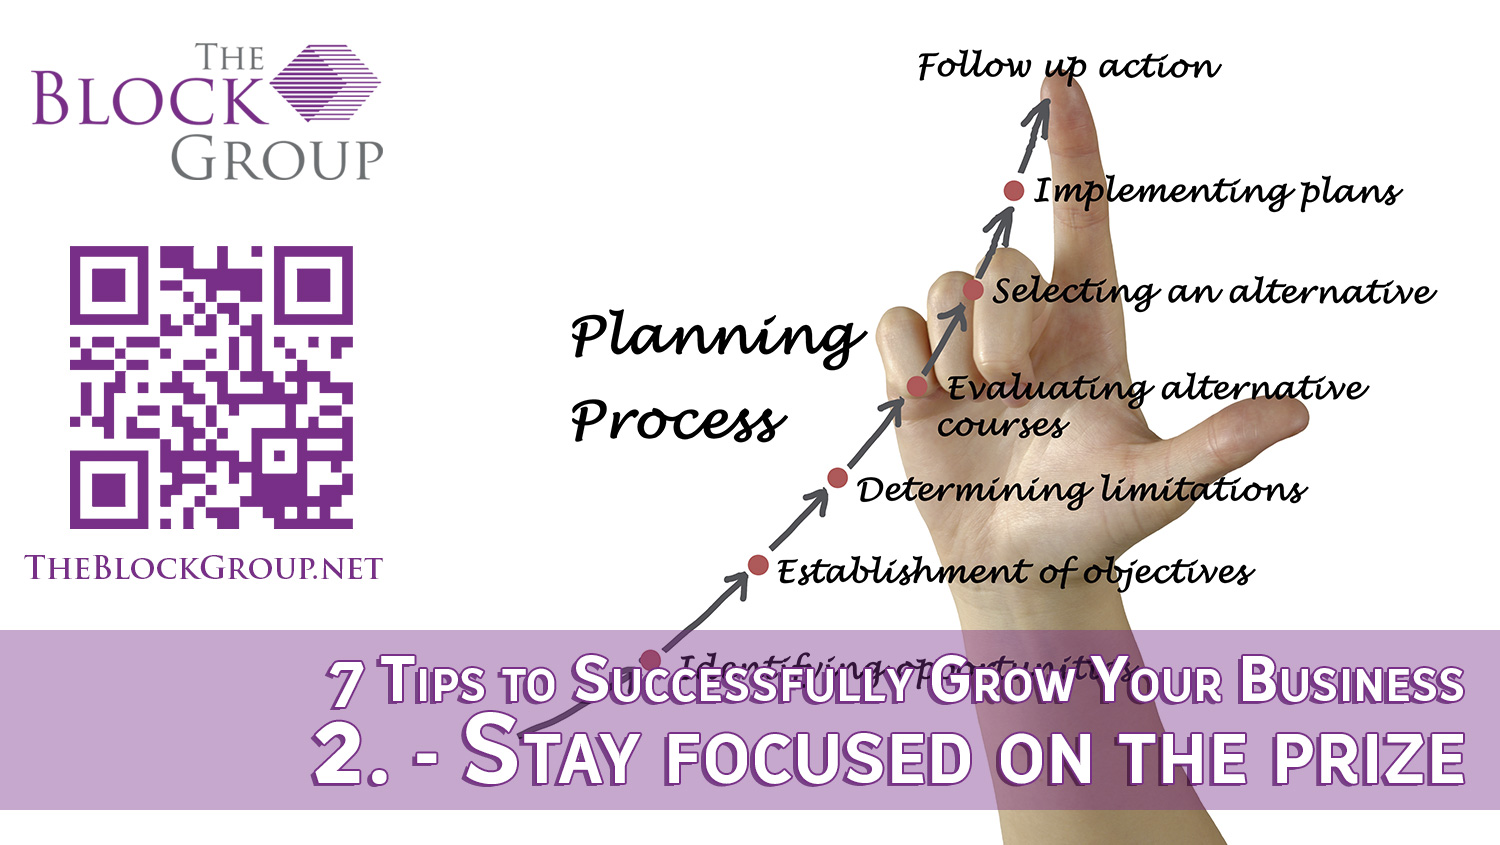 048-2-Stay-focused-on-the-prize